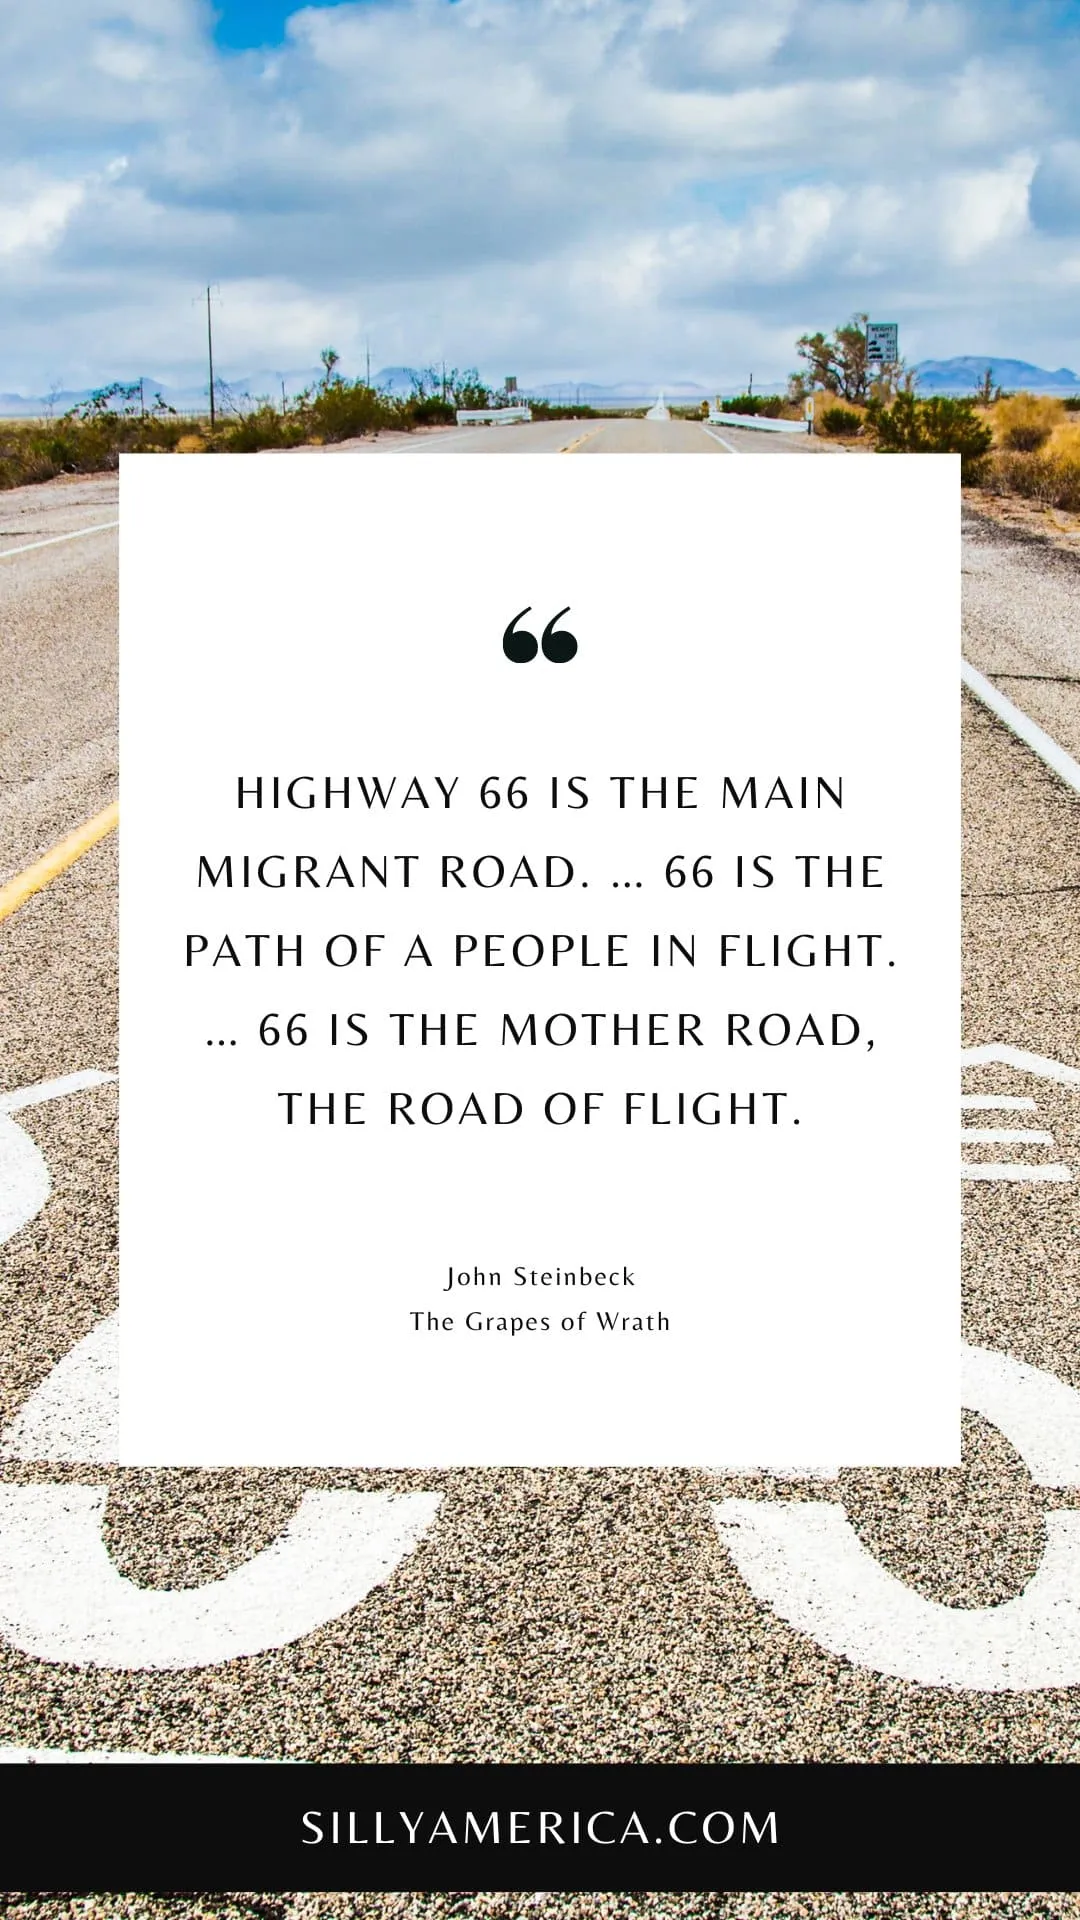 Route 66 Quotes, Sayings, and Phrases - Highway 66 is the main migrant road. … 66 is the path of a people in flight. … 66 is the mother road, the road of flight. - John Steinbeck, The Grapes of Wrath